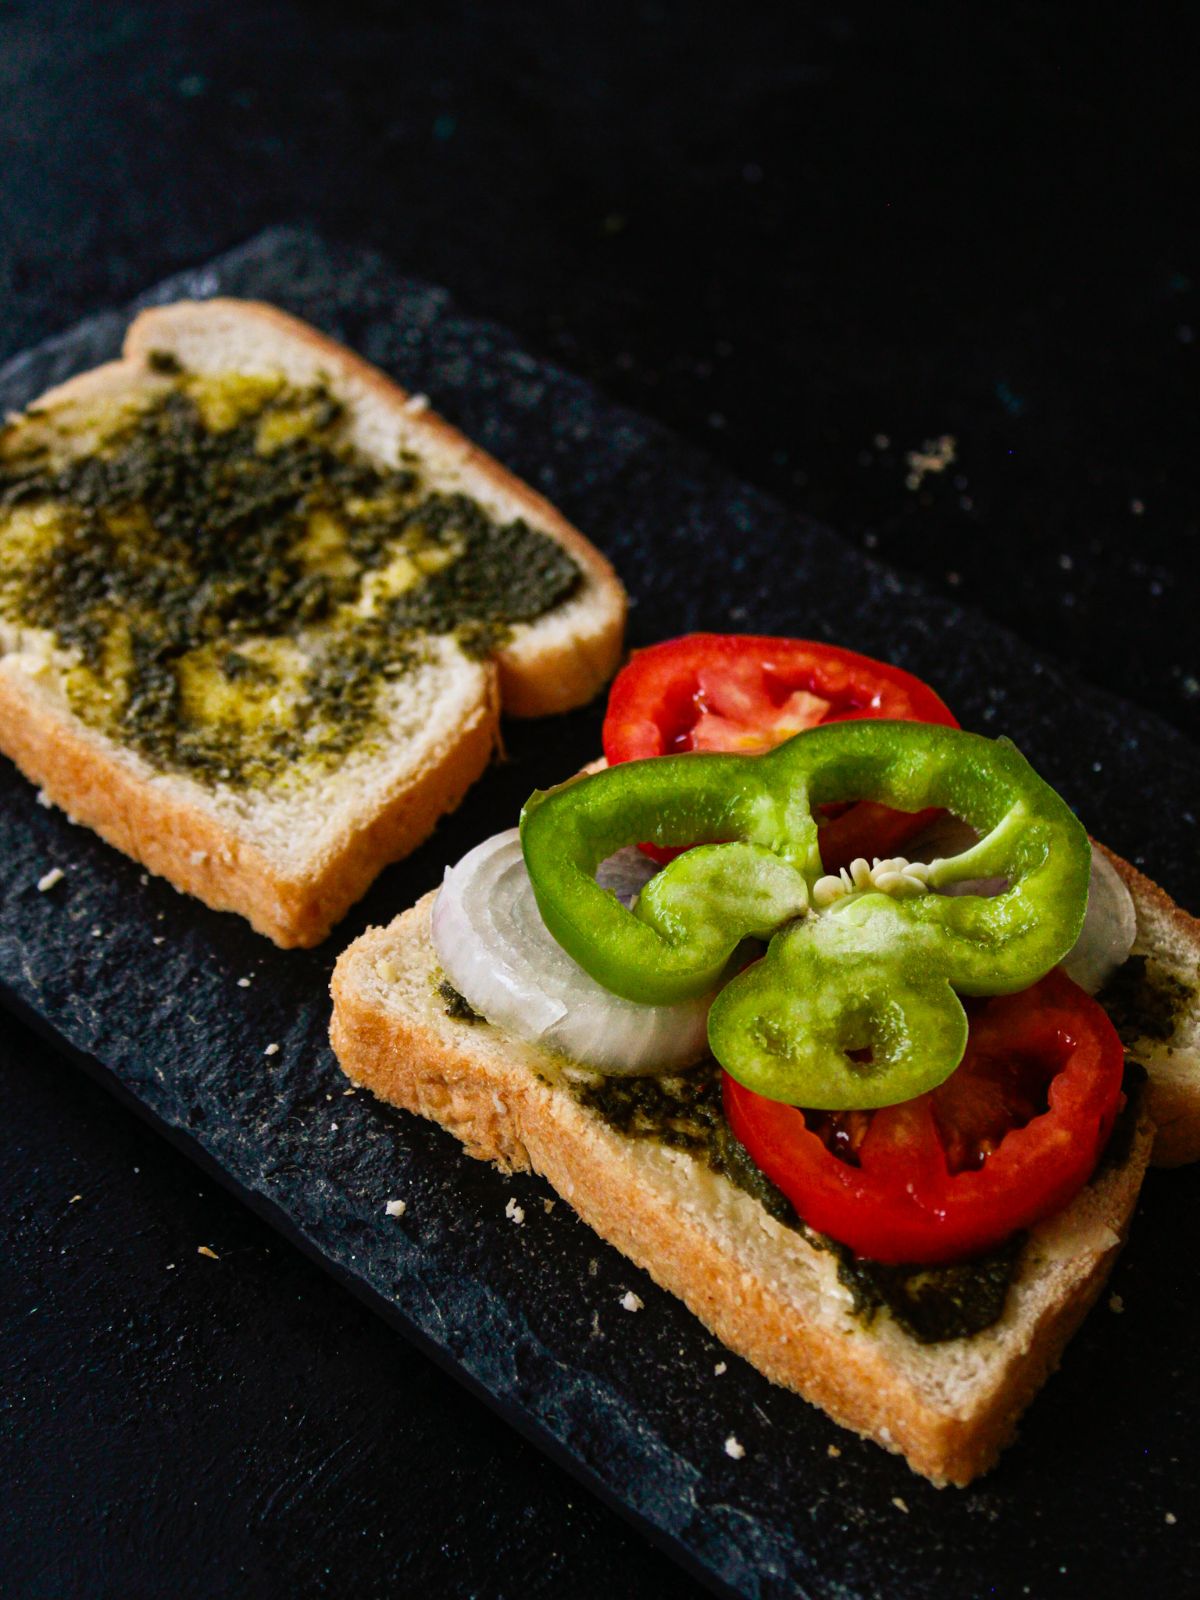 green pepper ring on top of tomato on sandwich slices